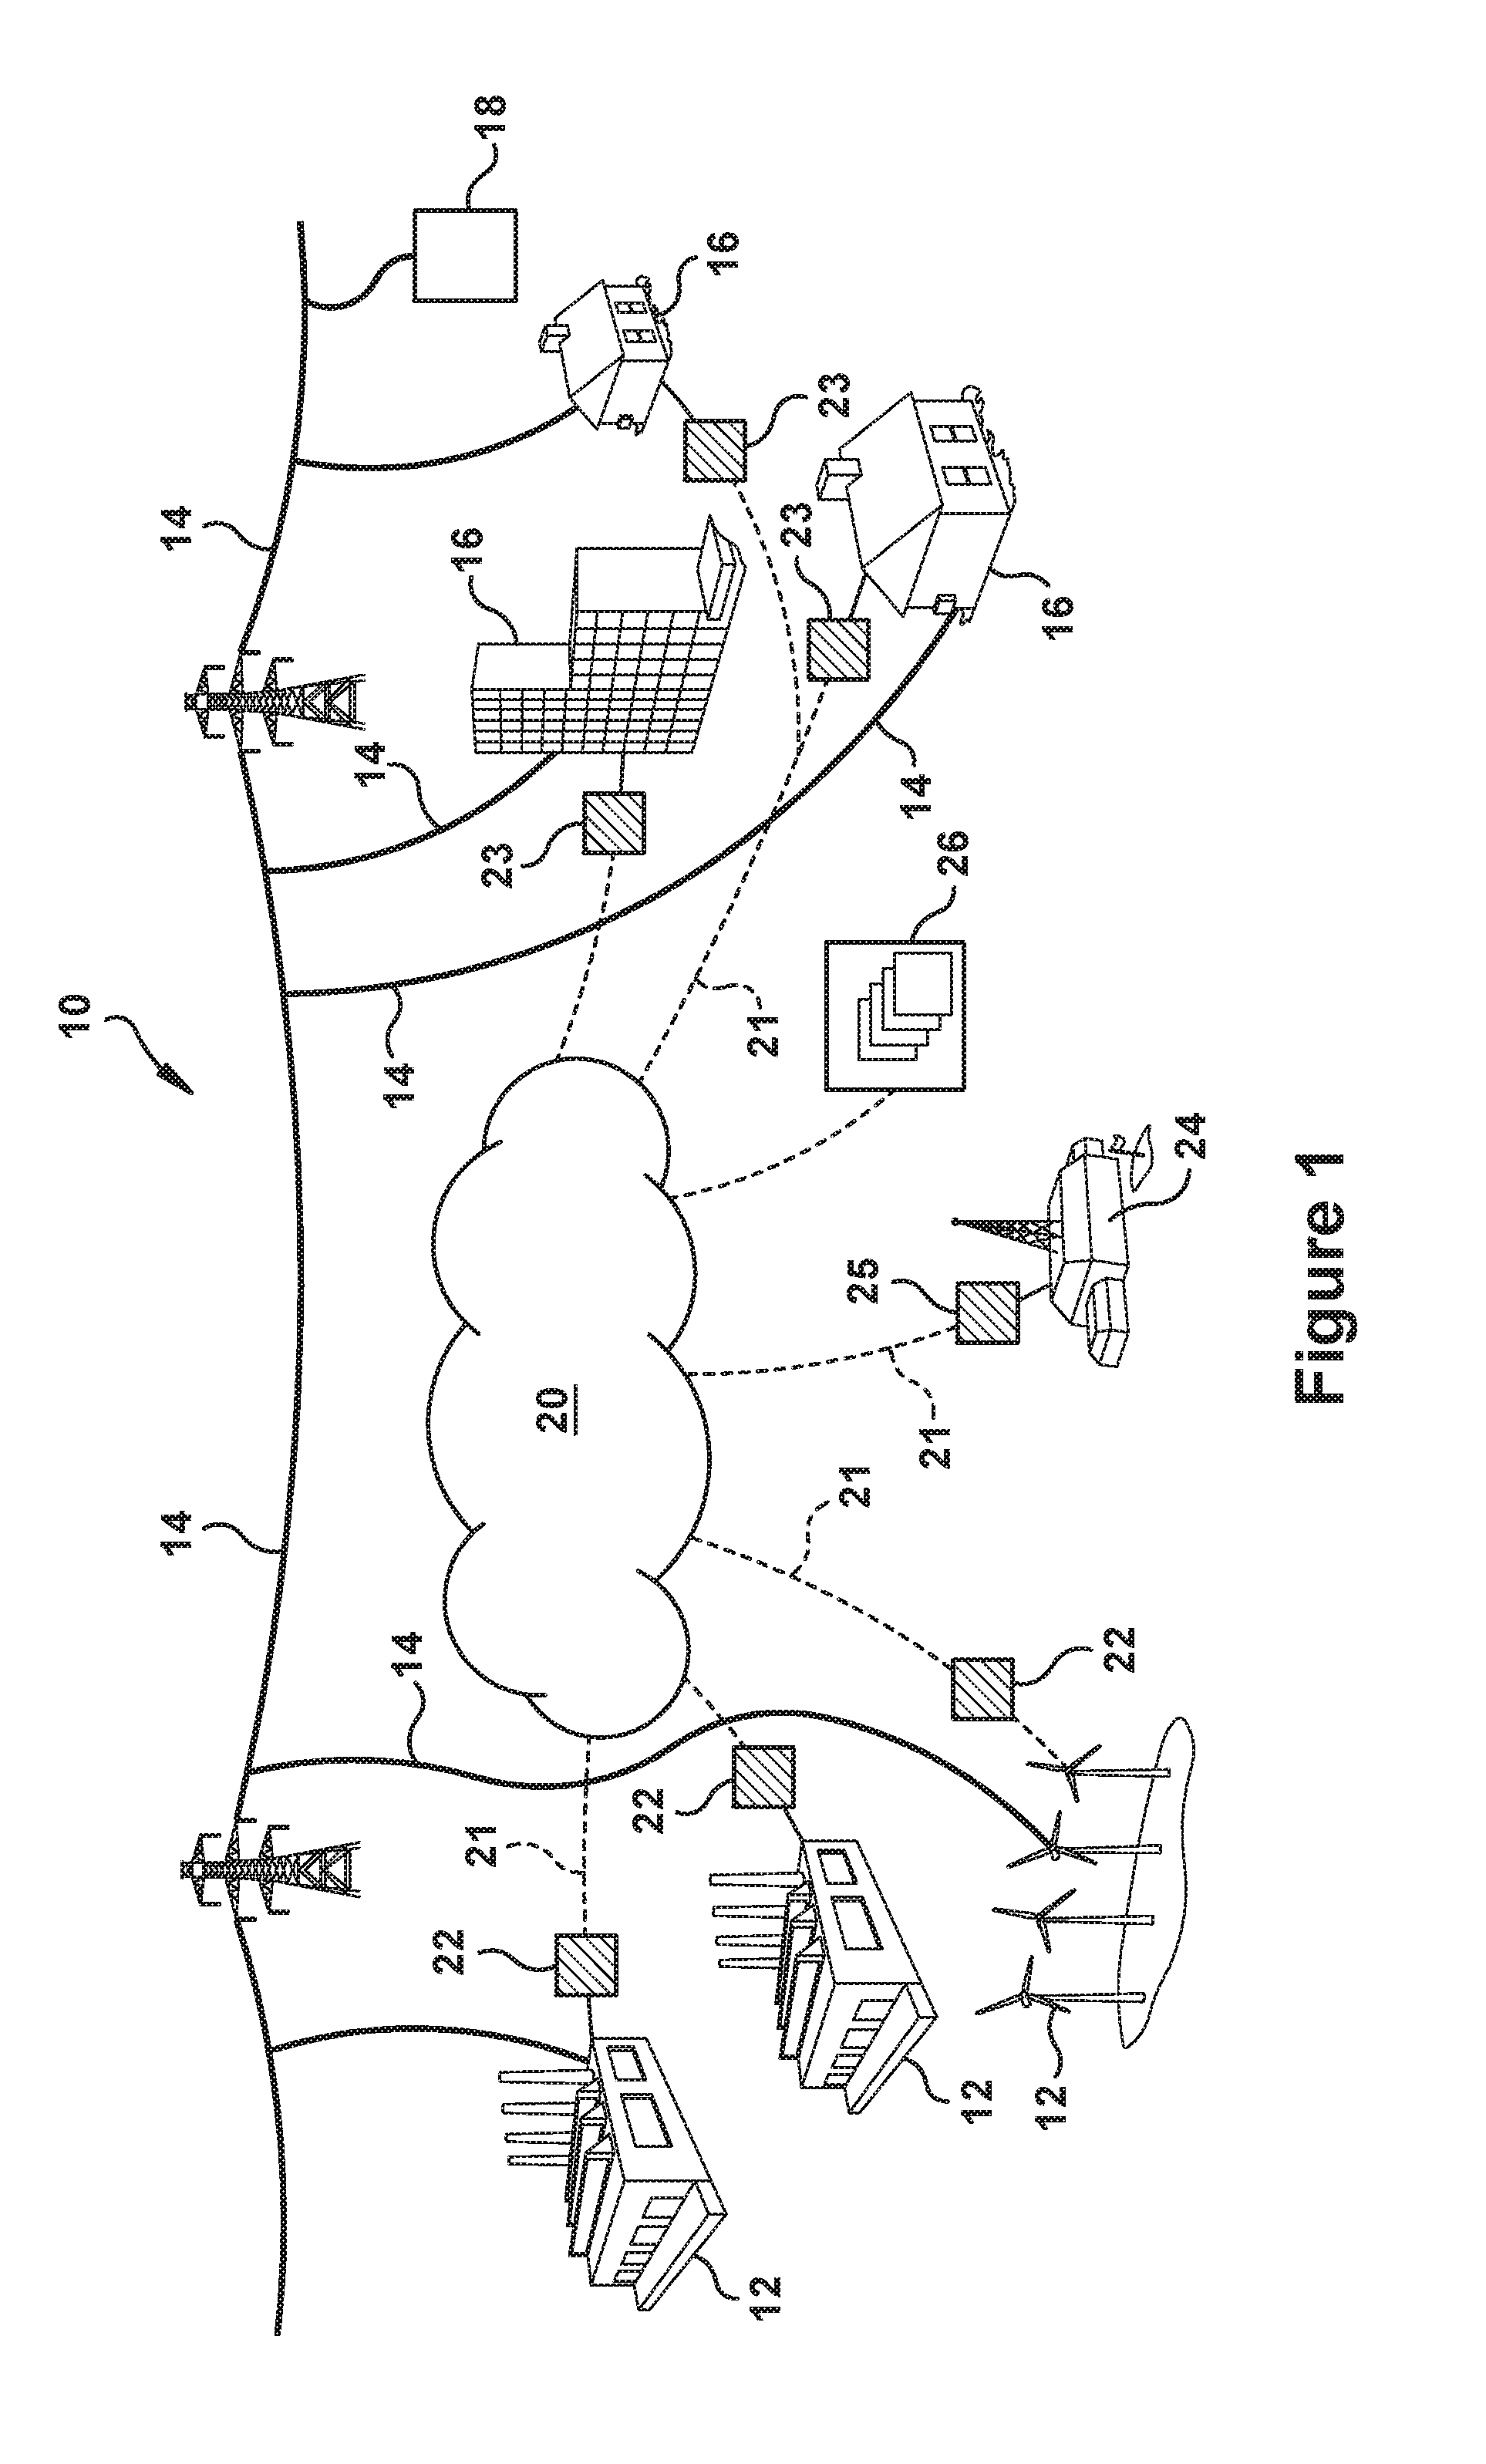 Methods and systems for enhancing operation of power plant generating units and systems